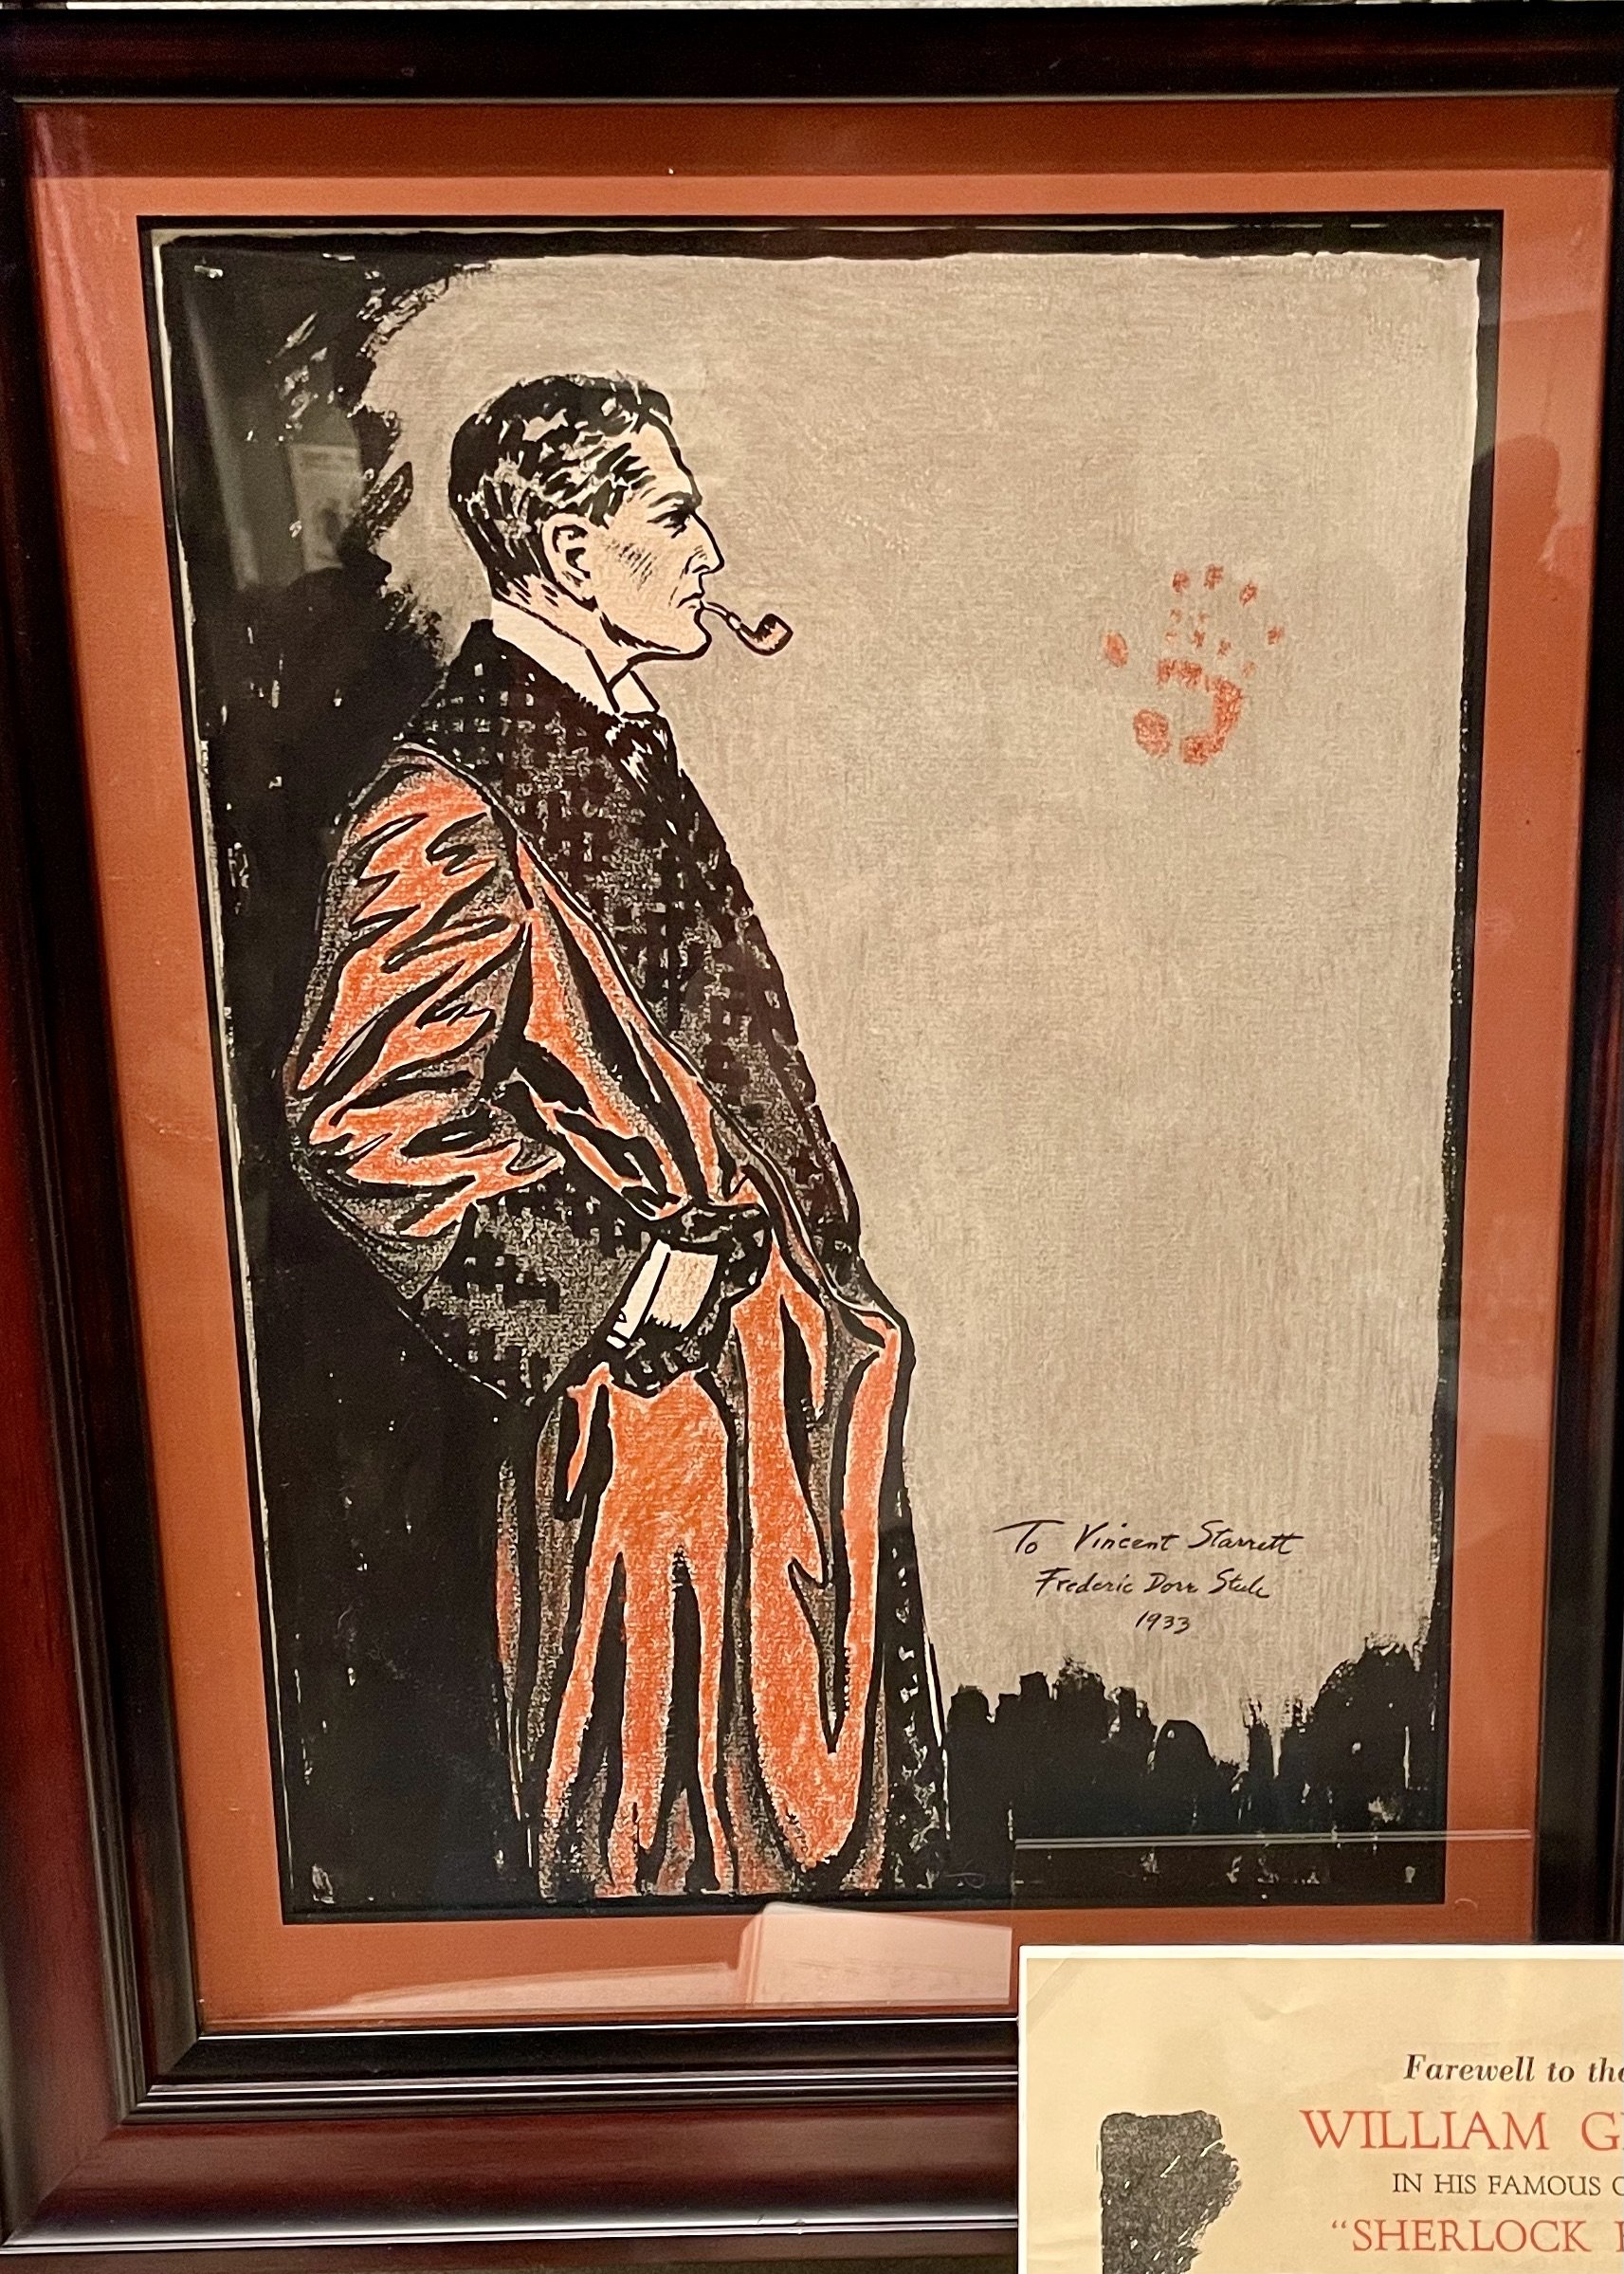  This image was drawn by Frederic Dorr Steele and is inscribed to Vincent Starrett, signed by Steele and dated 1933—the same year as The Private Life of Sherlock Holmes was published.  